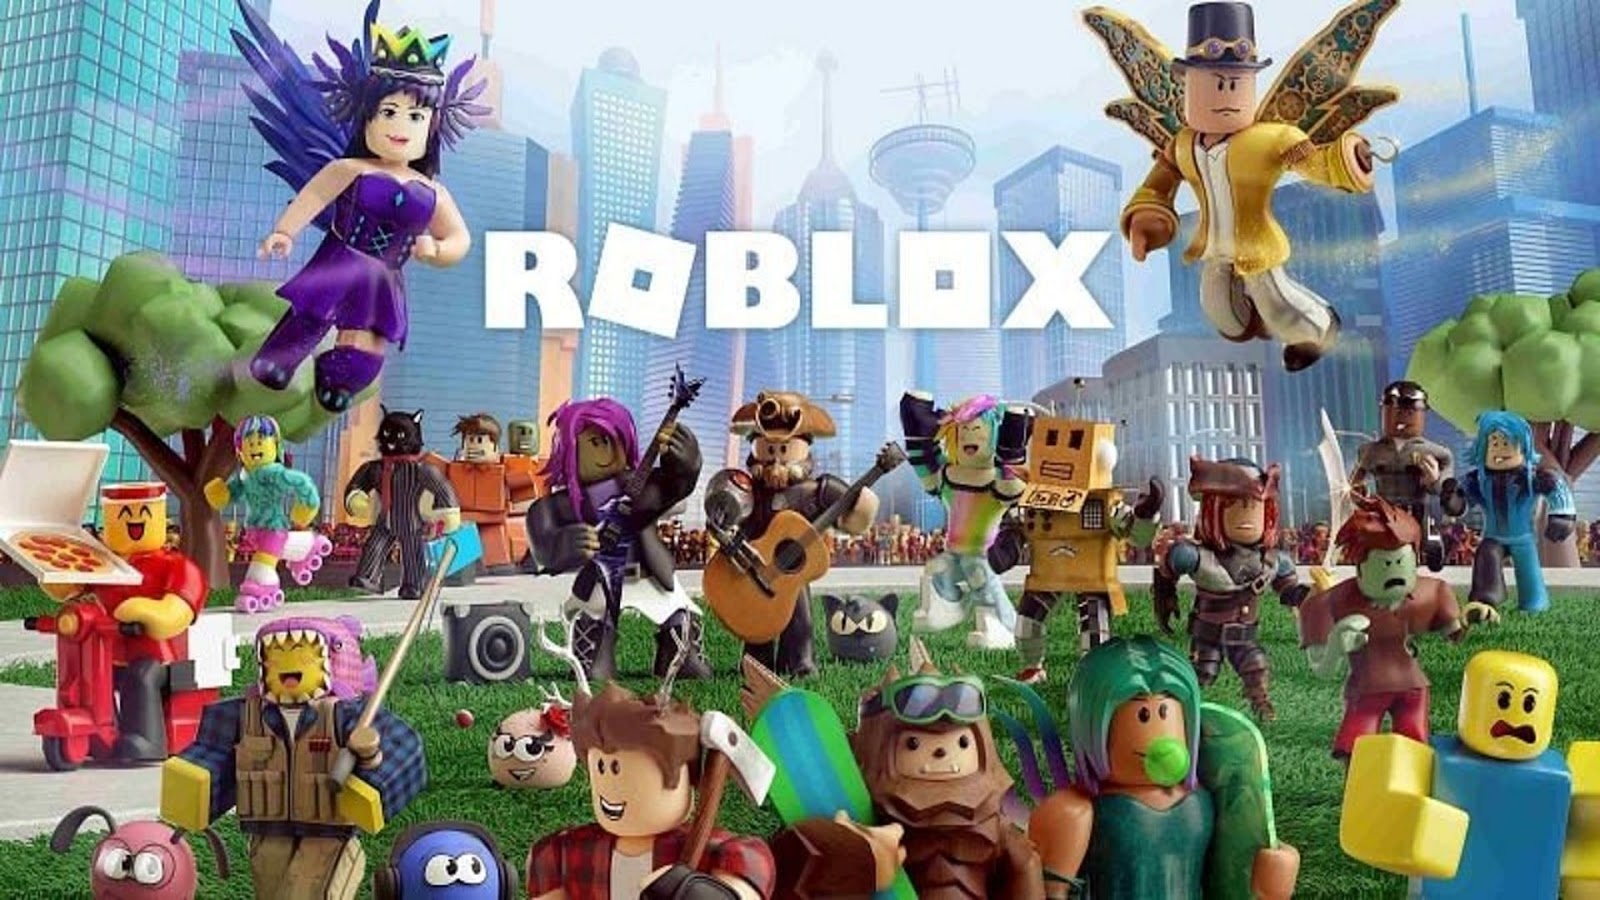 ROBLOX NEWS: ROBLOX DOWN!, PRIME GAMING EXCLUSIVE ITEMS, LEAKS